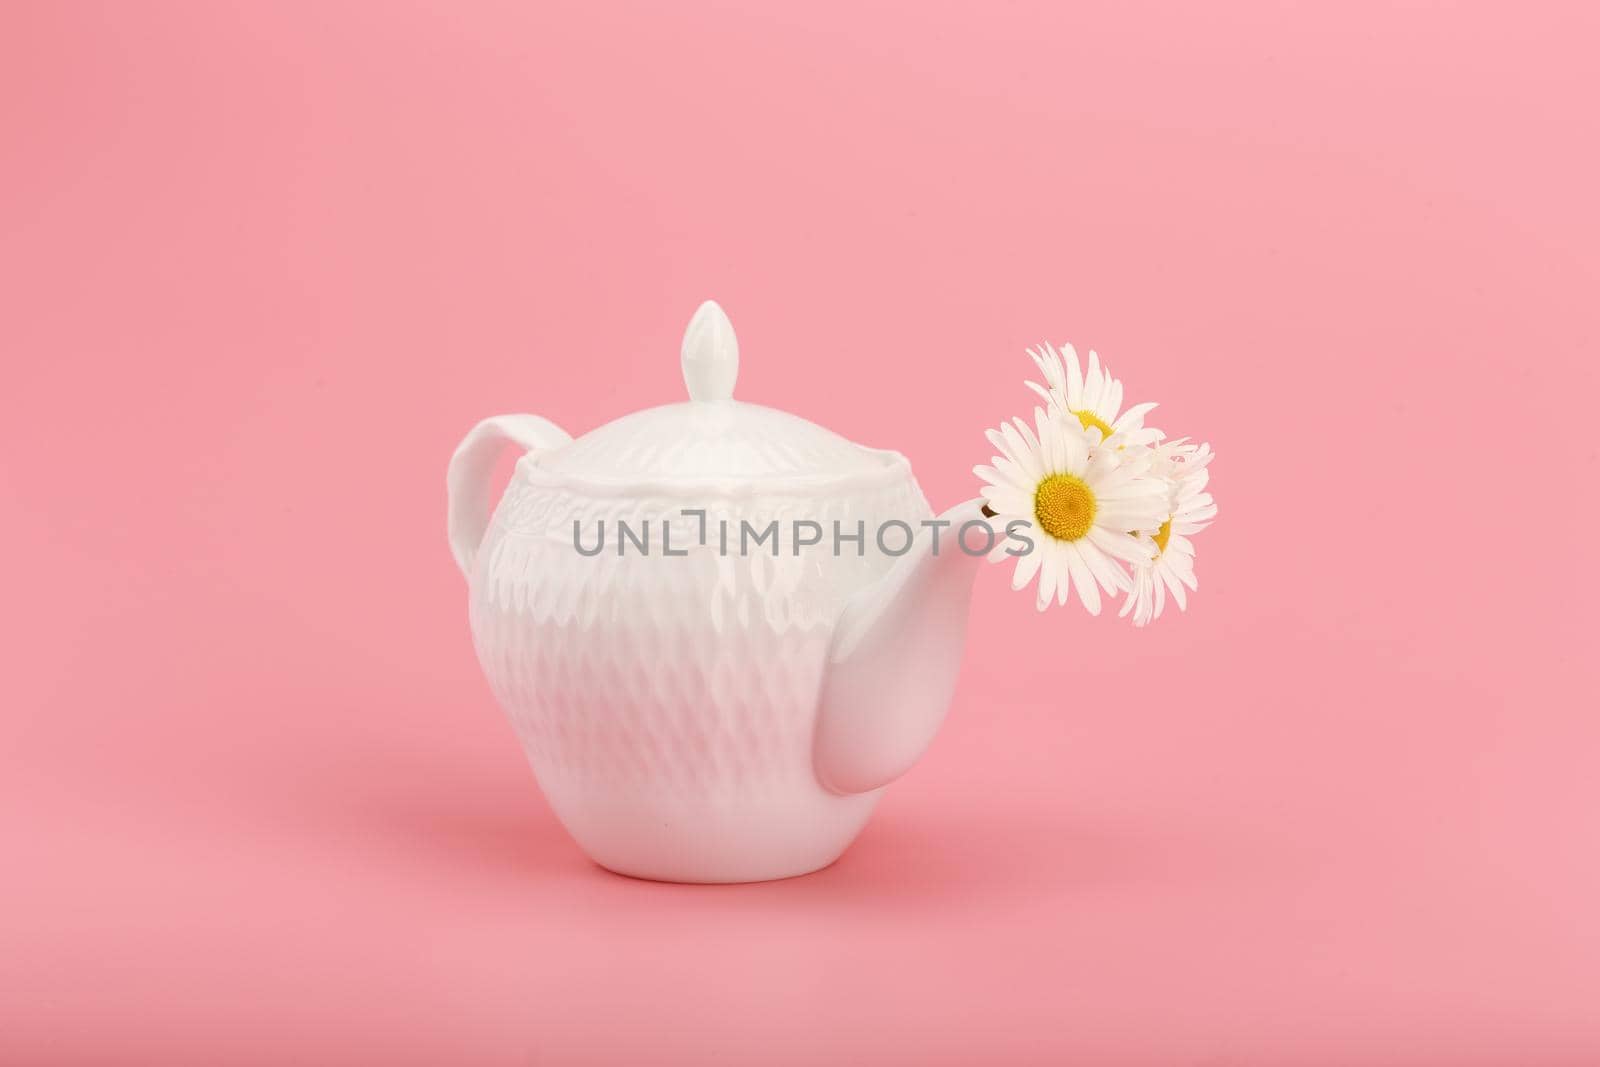 White porcelain tea pot with camomile flowers on pink background. Creative concept of herbal tea, wellbeing and healthy lifestyle